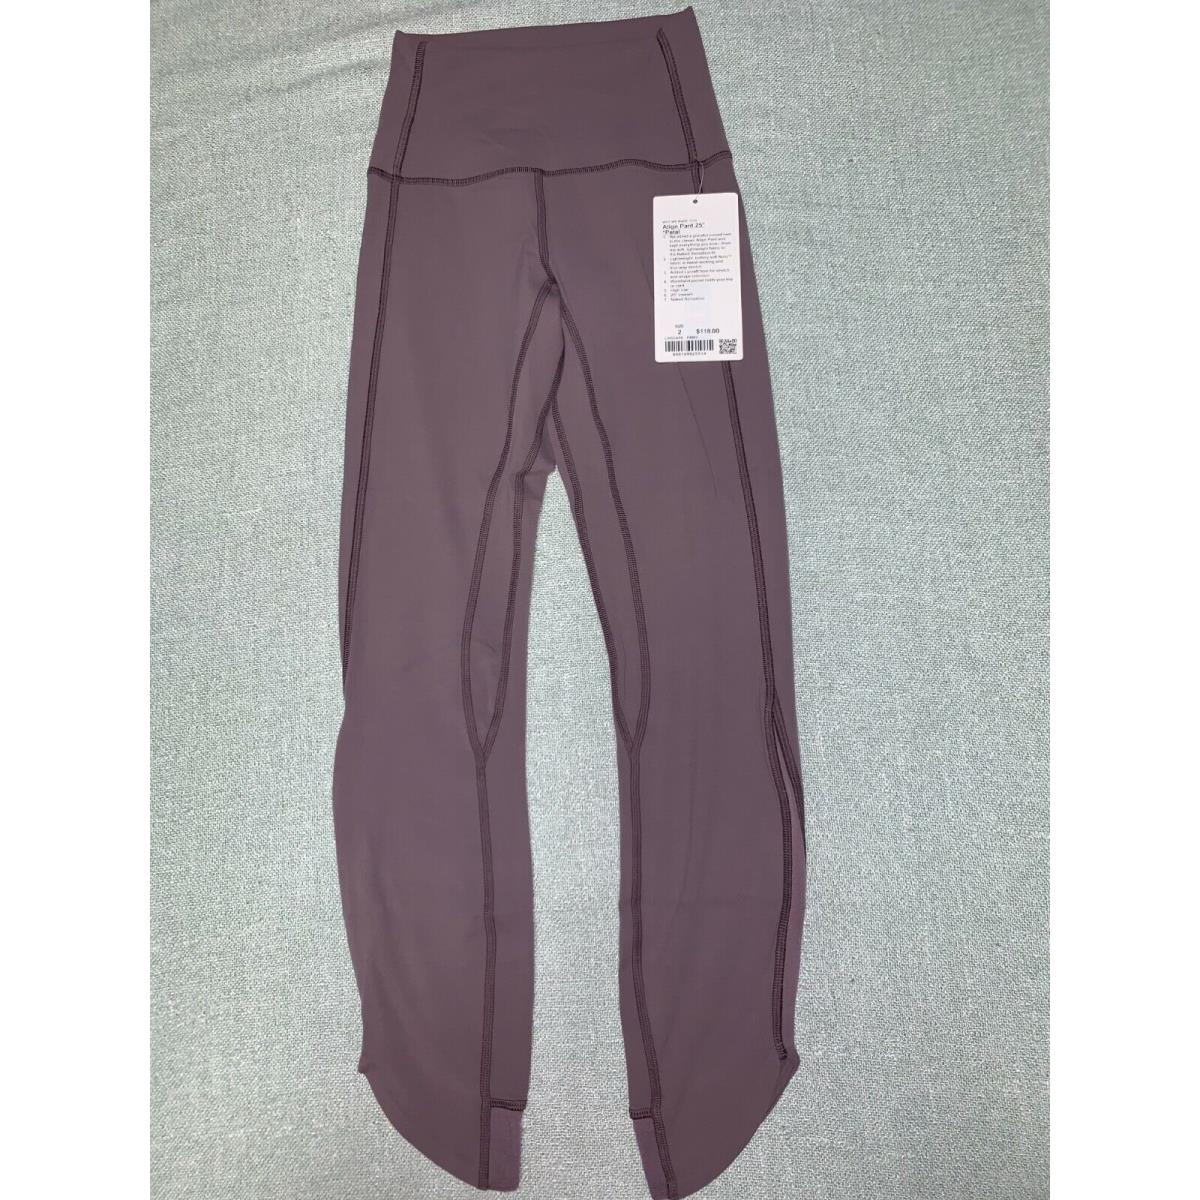 Lululemon Align Pant 25 Petal Frosted Mulberry Size 2